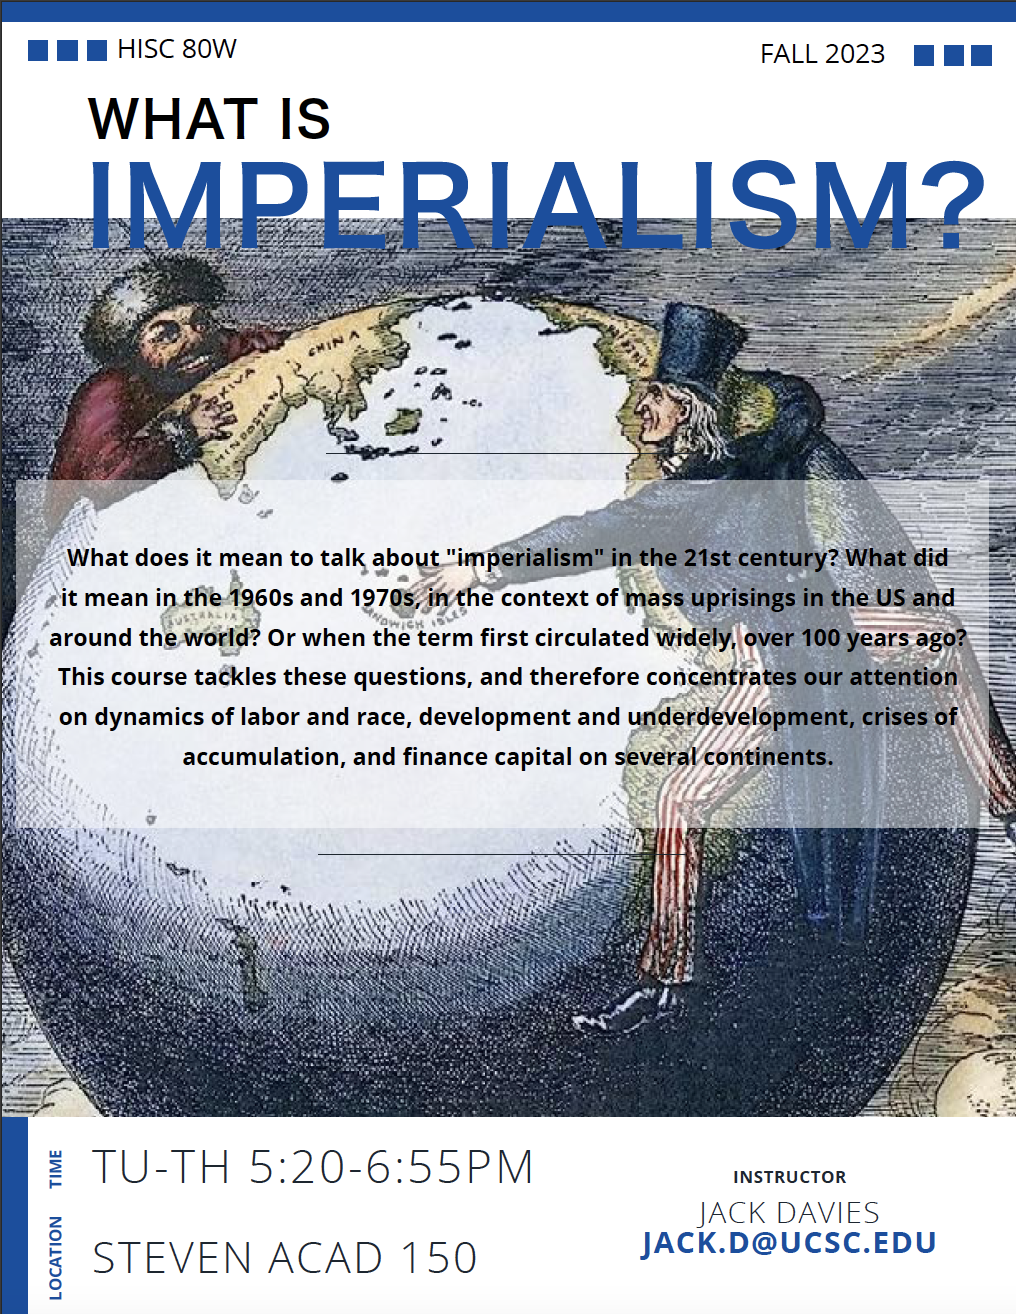 HISC 80W: What is Imperialism?